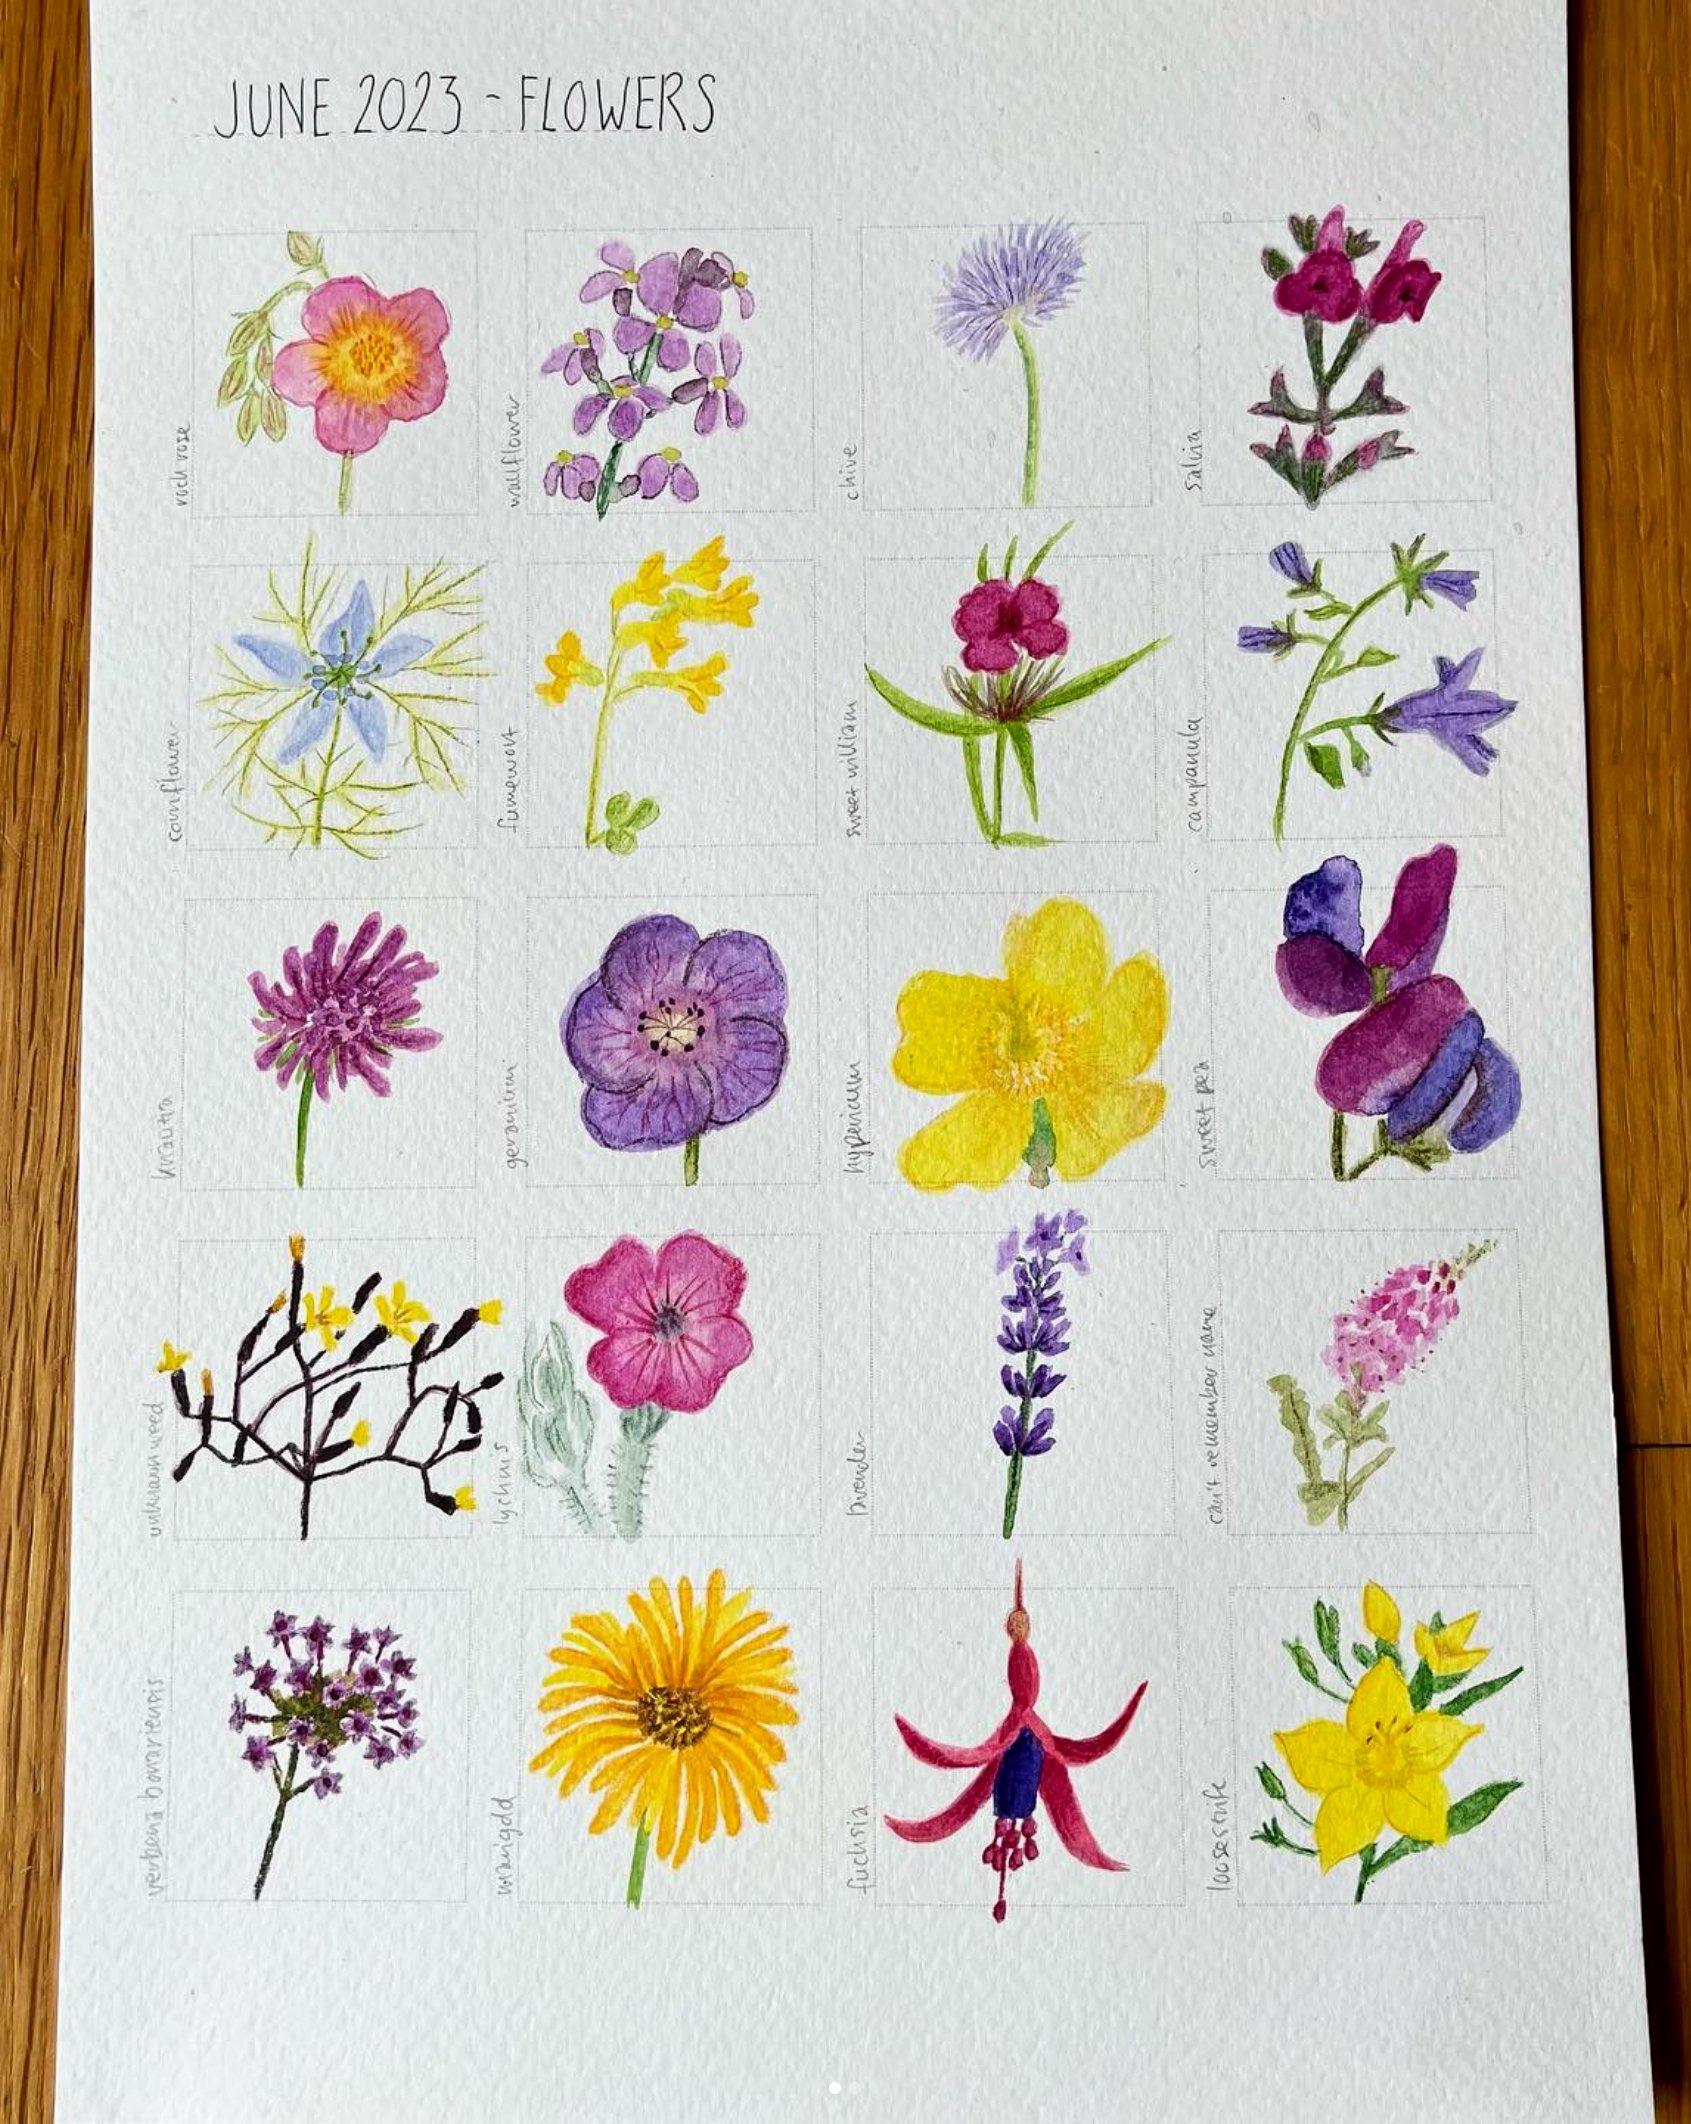 I painted the flowers I grew in my garden : r/Watercolor